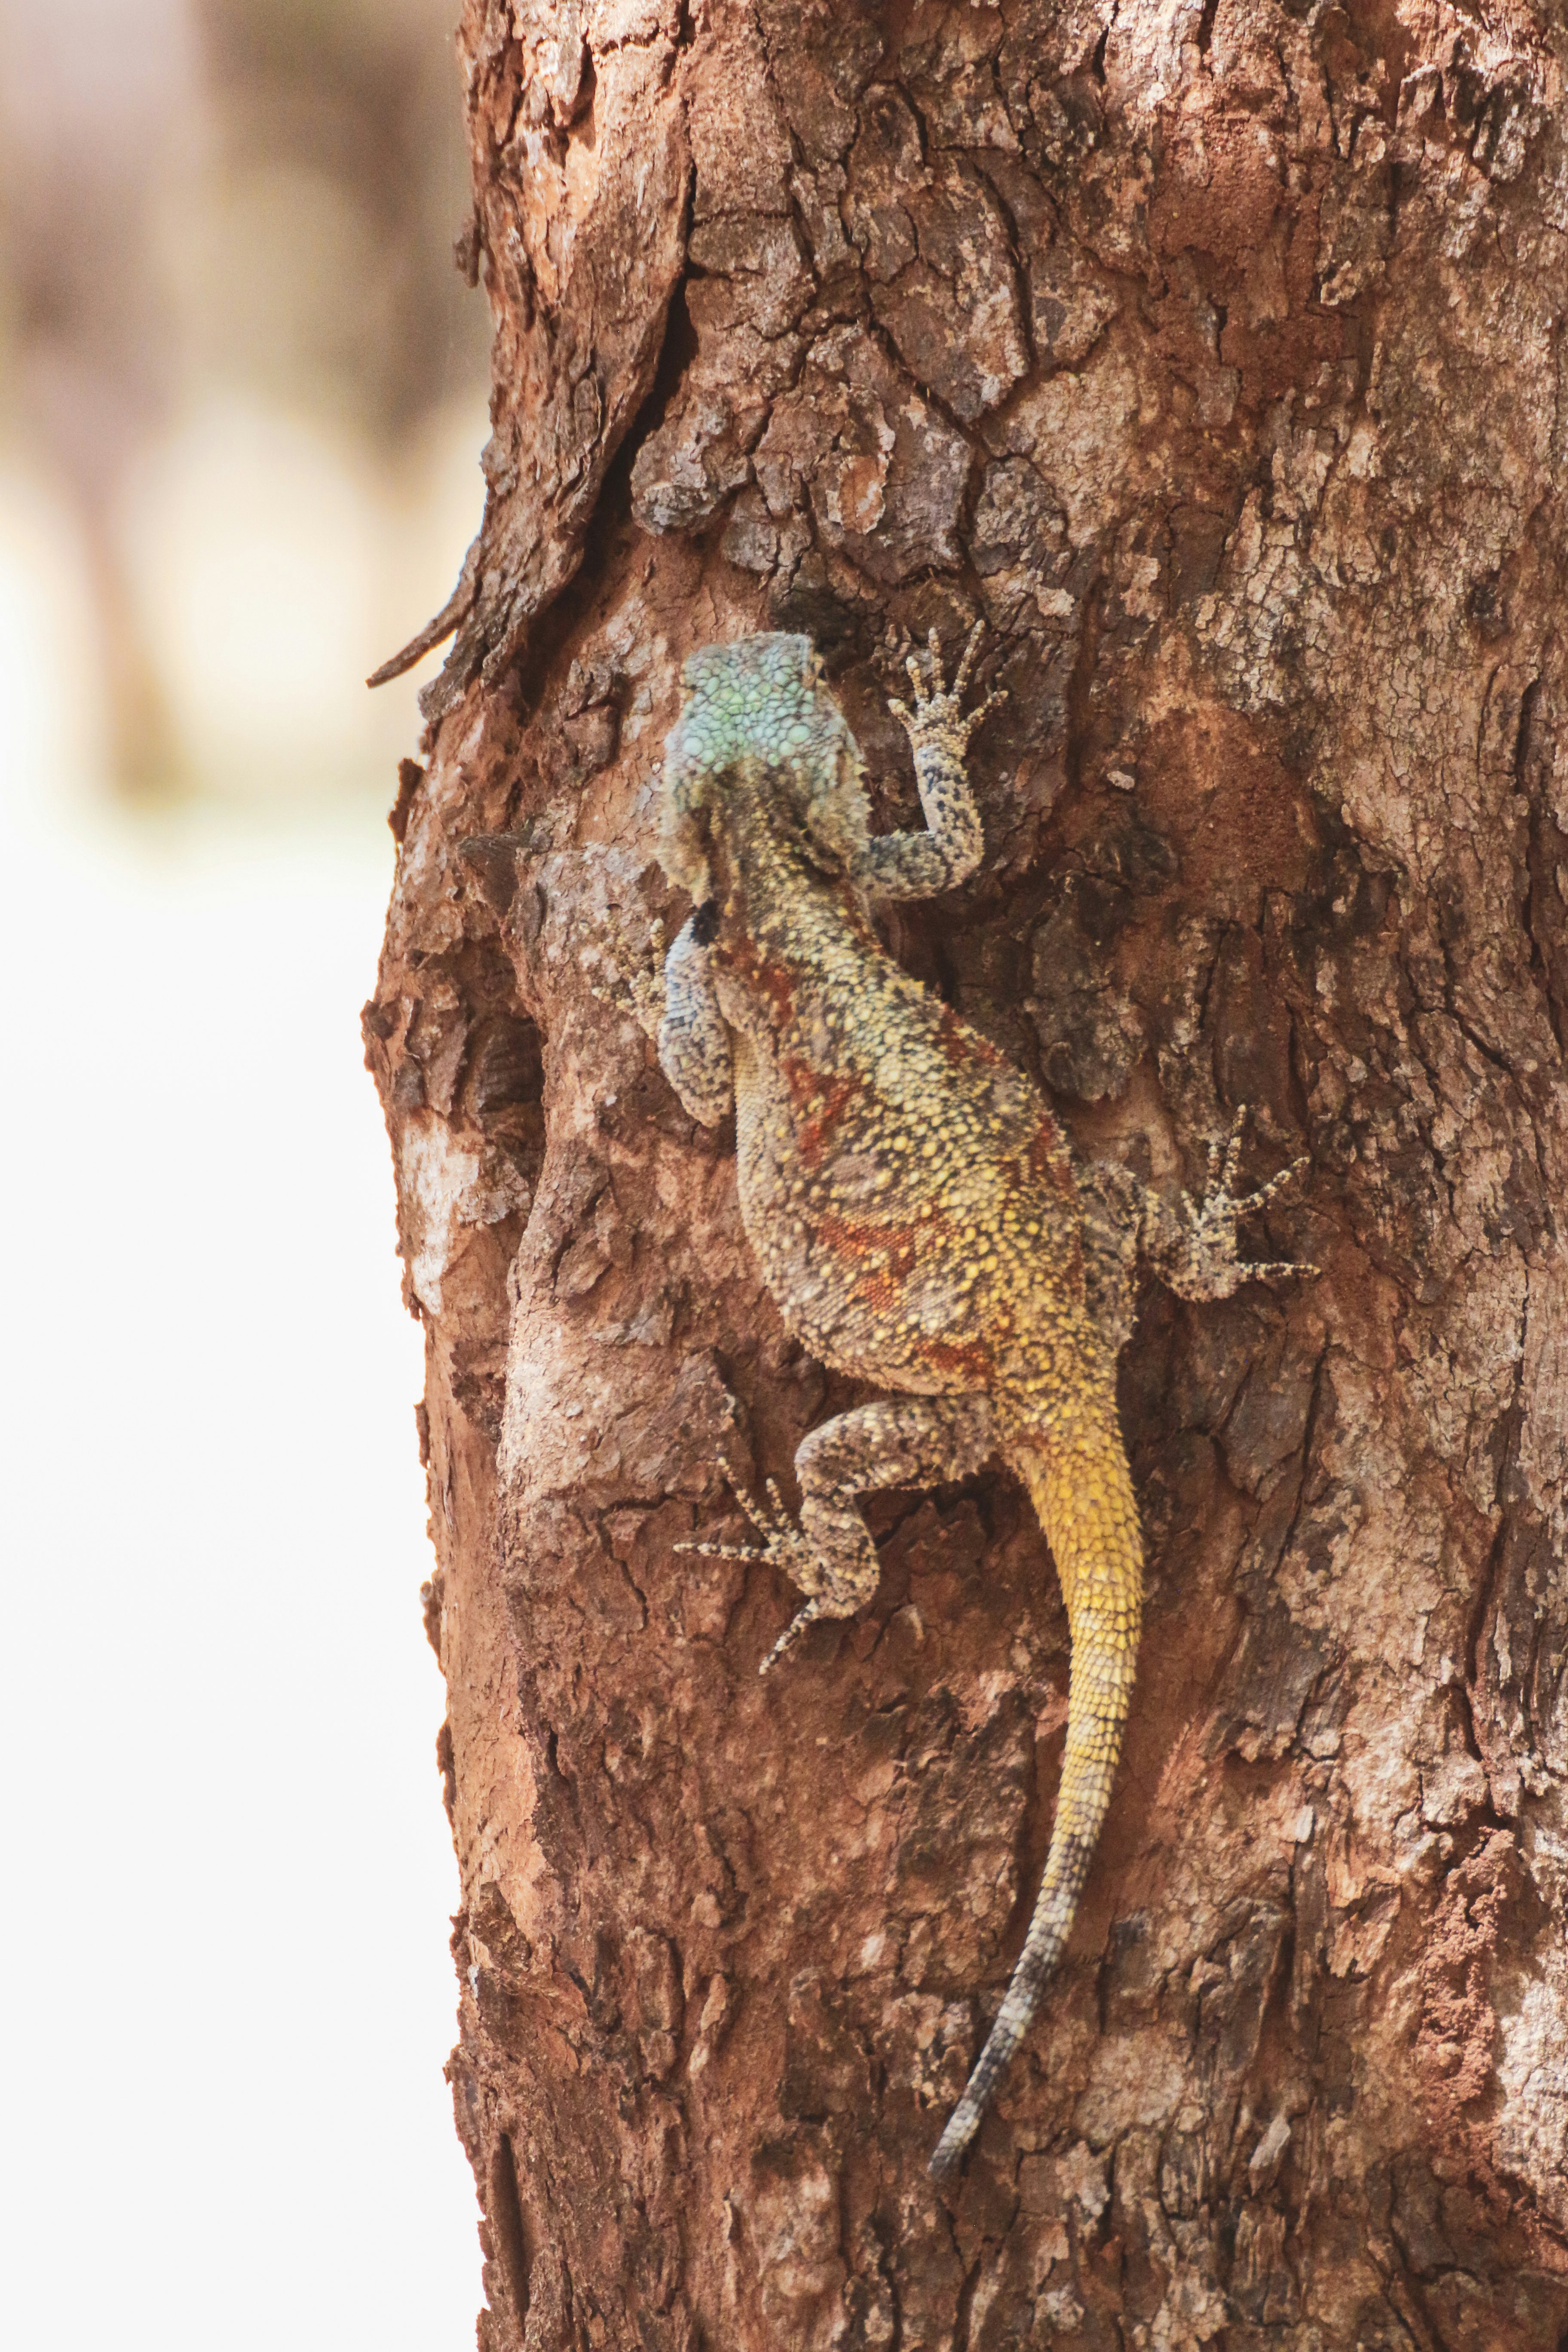 brown and blue lizard on brown tree branch